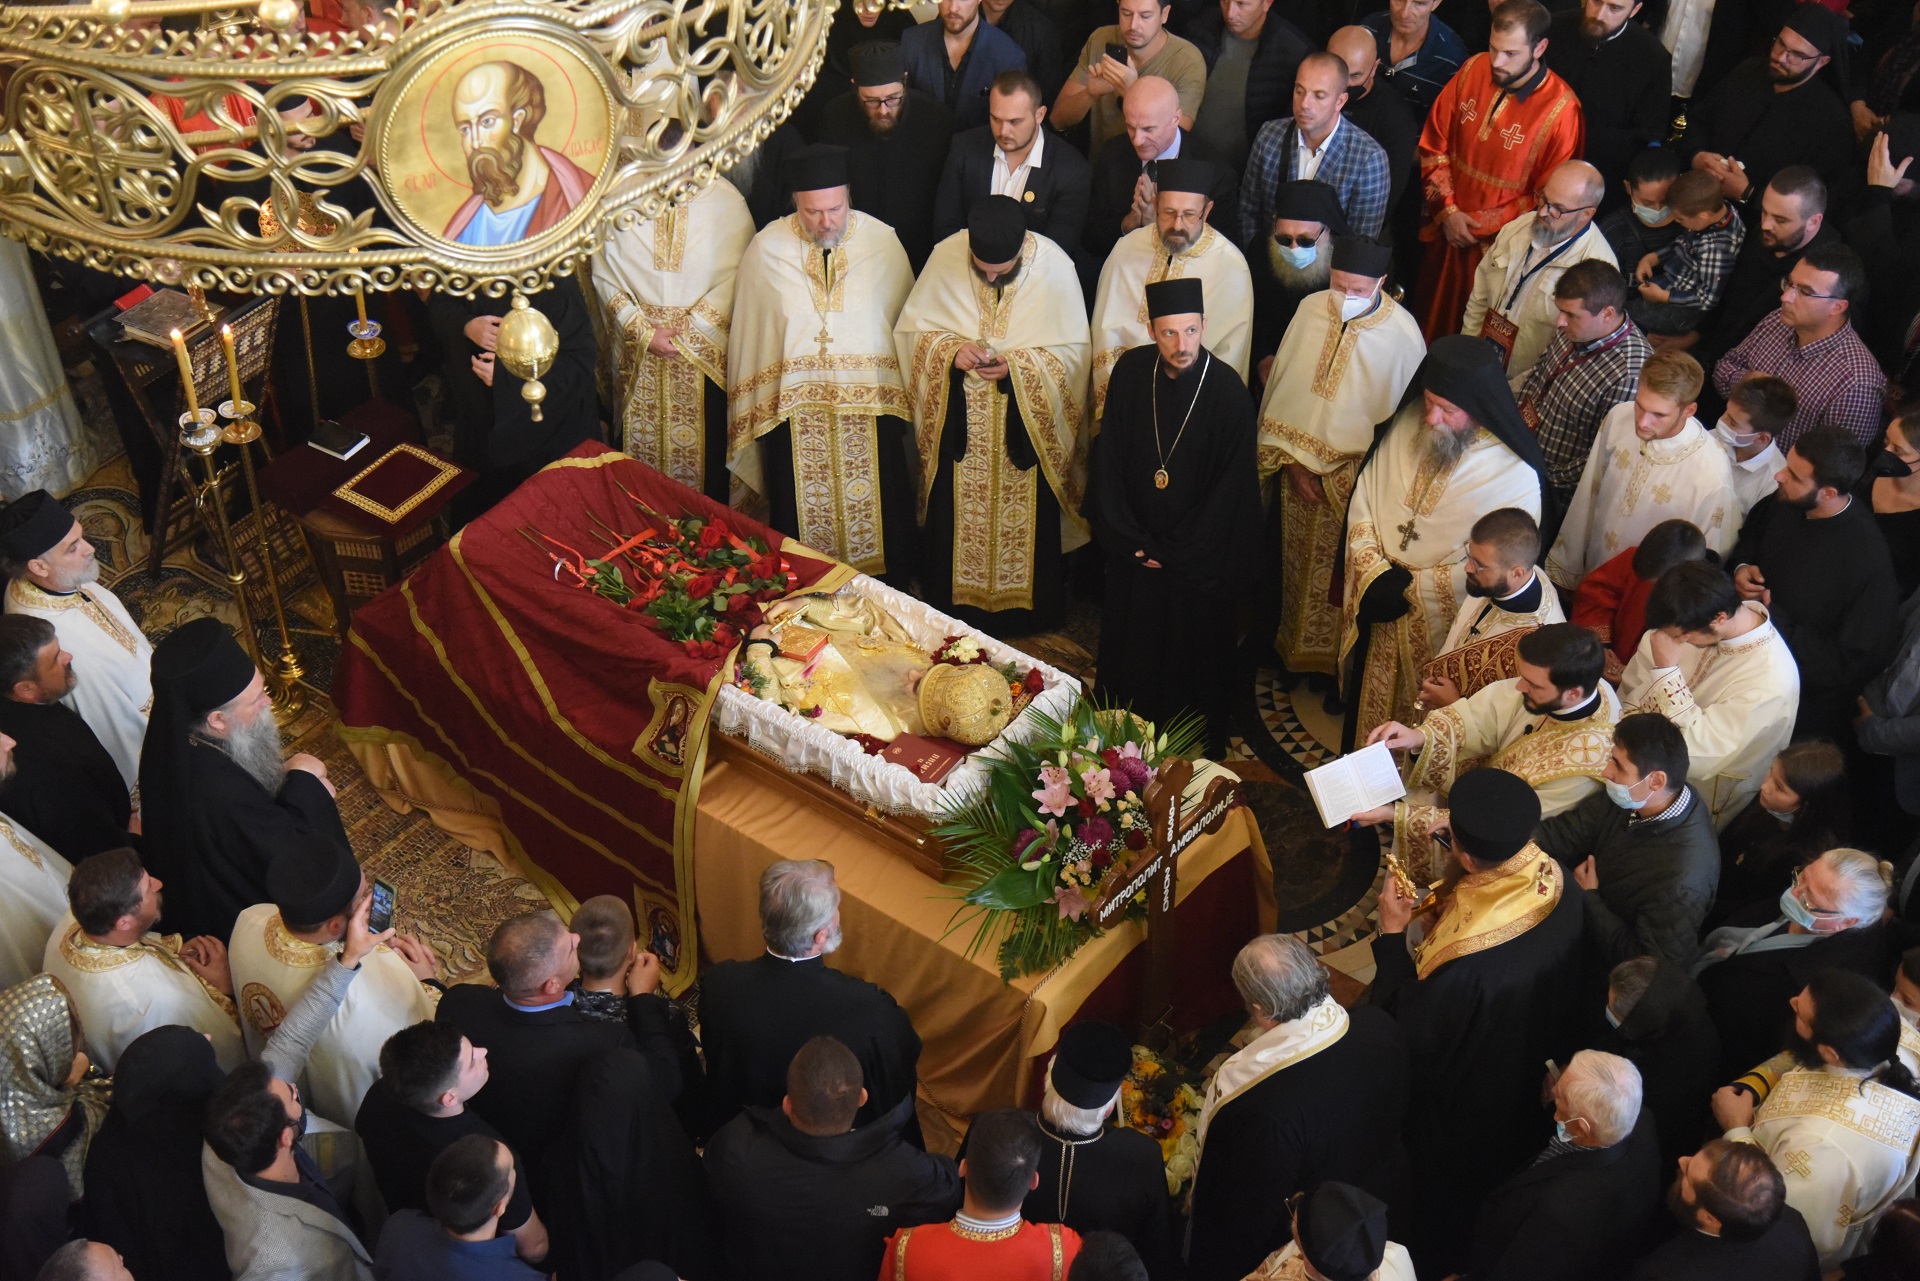 epa08789315 Orthodox priests hold a service by the coffin of Serbian Orthodox Church Metropolitan bishop of Montenegro, Metropolitan Amfilohije (Radovic) in Podgorica, Montenegro, 31 October 2020. Metropolitanate of Montenegro and the Littoral reported that Metropolitan Amfilohije died on 30 October 2020 in Podgorica, Montenegro at the age of 82. He had served in the top post in the Serbian Orthodox church for 30 years, a period in which former communist Yugoslavia shattered into separate states, including the Montenegro's breakaway from Serbia in 2006.  EPA/BORIS PEJOVIC